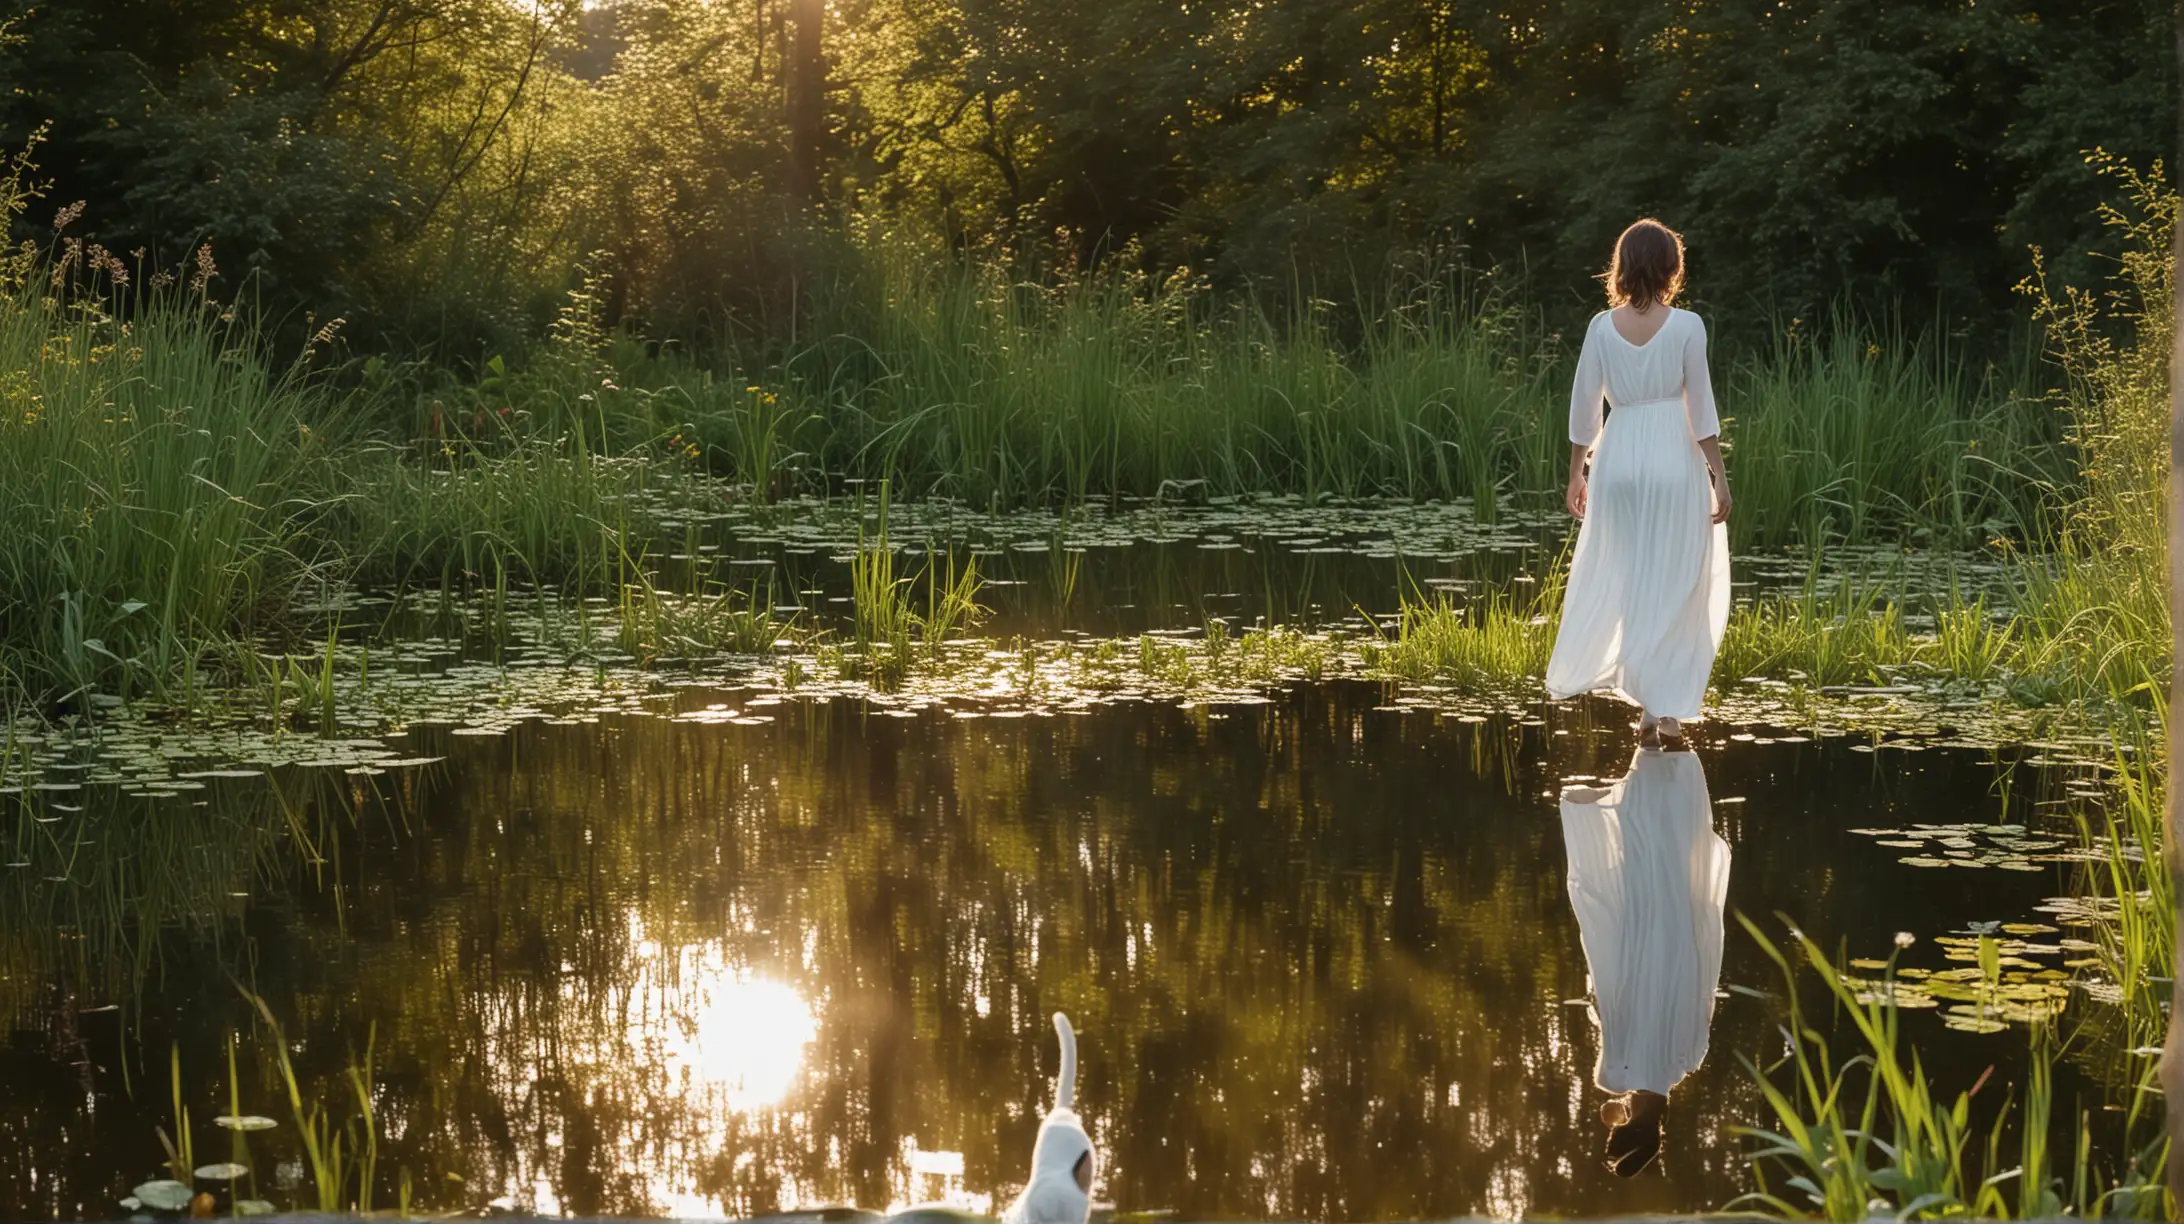 A woman in a long white dress and her favourite black cat walk around a small wild pond, late afternoon